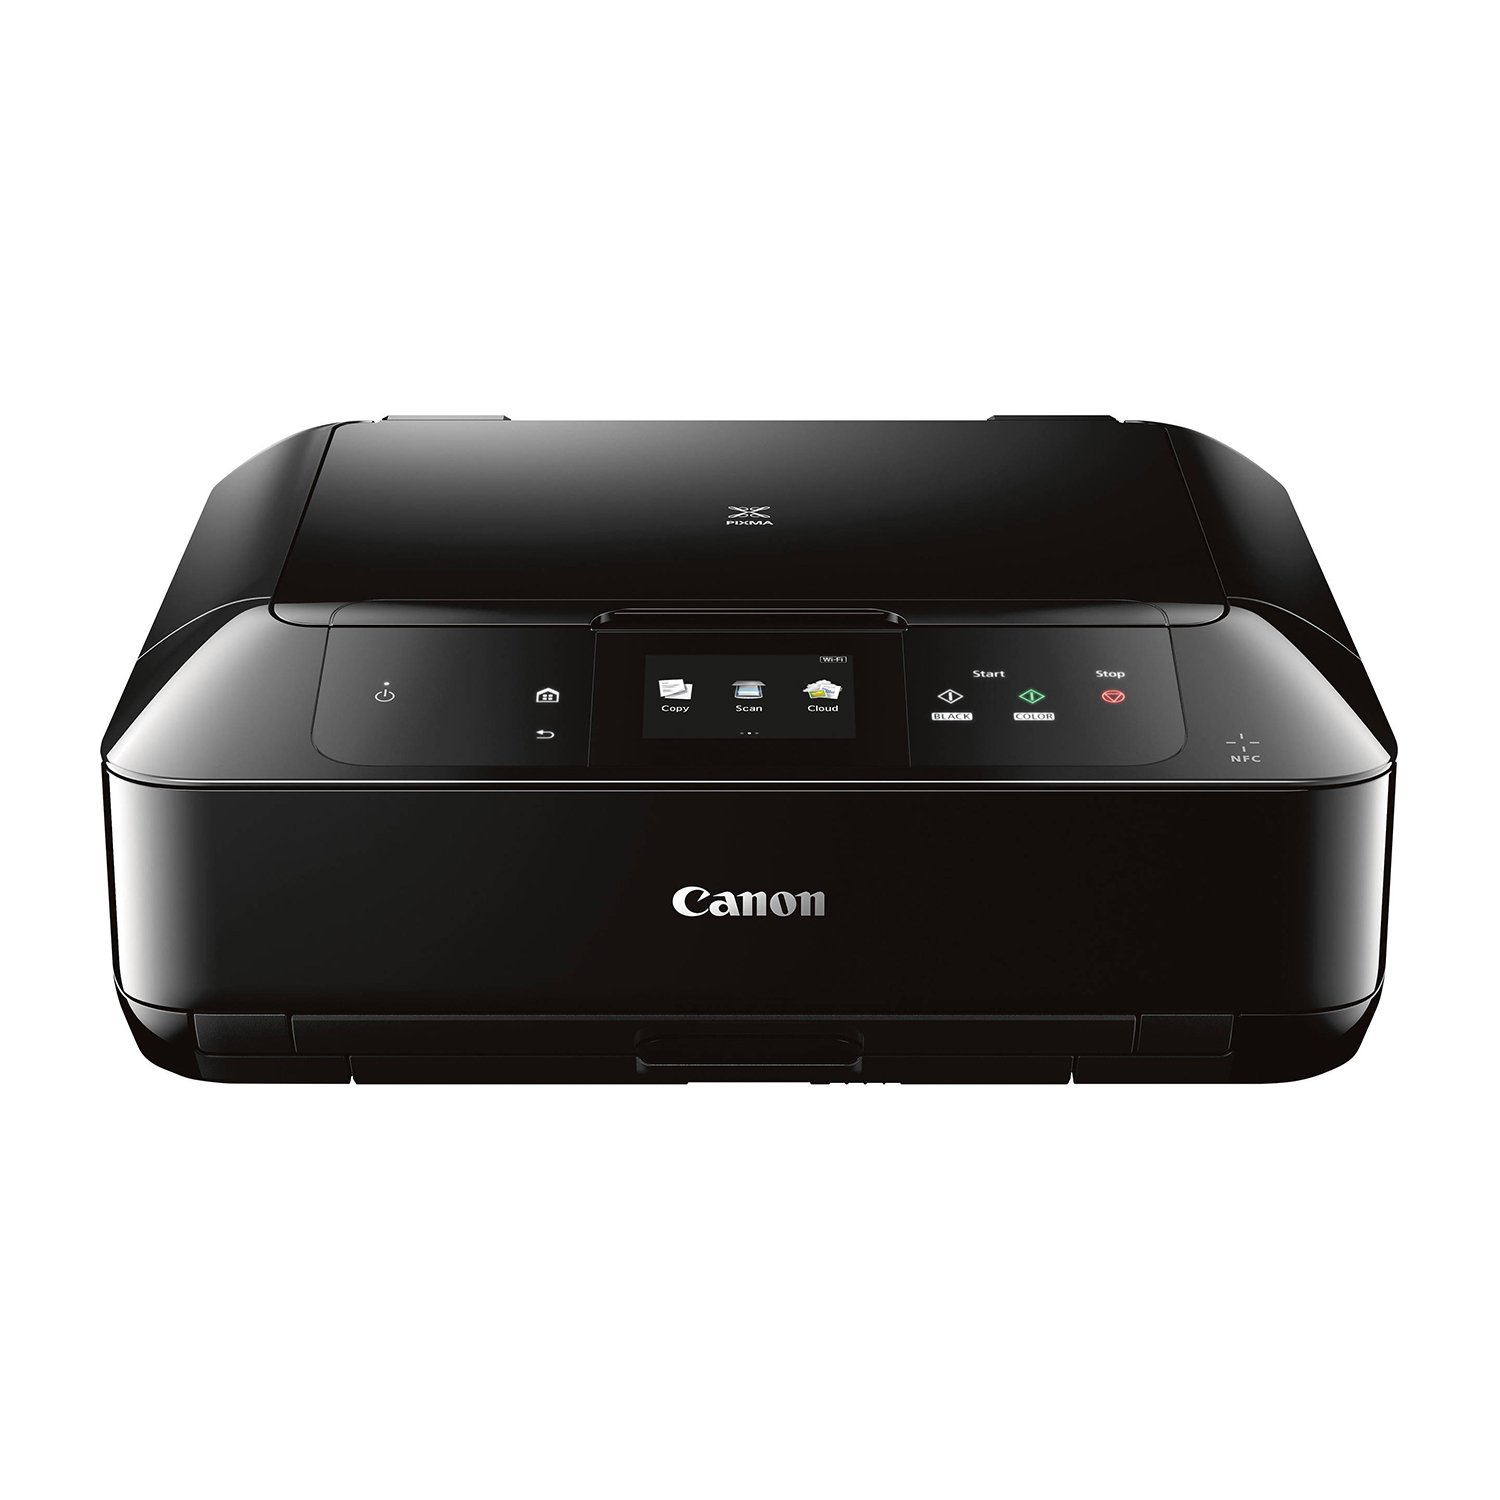 13 Best Canon Mg7720 Printer Ink Cartridges for 2023